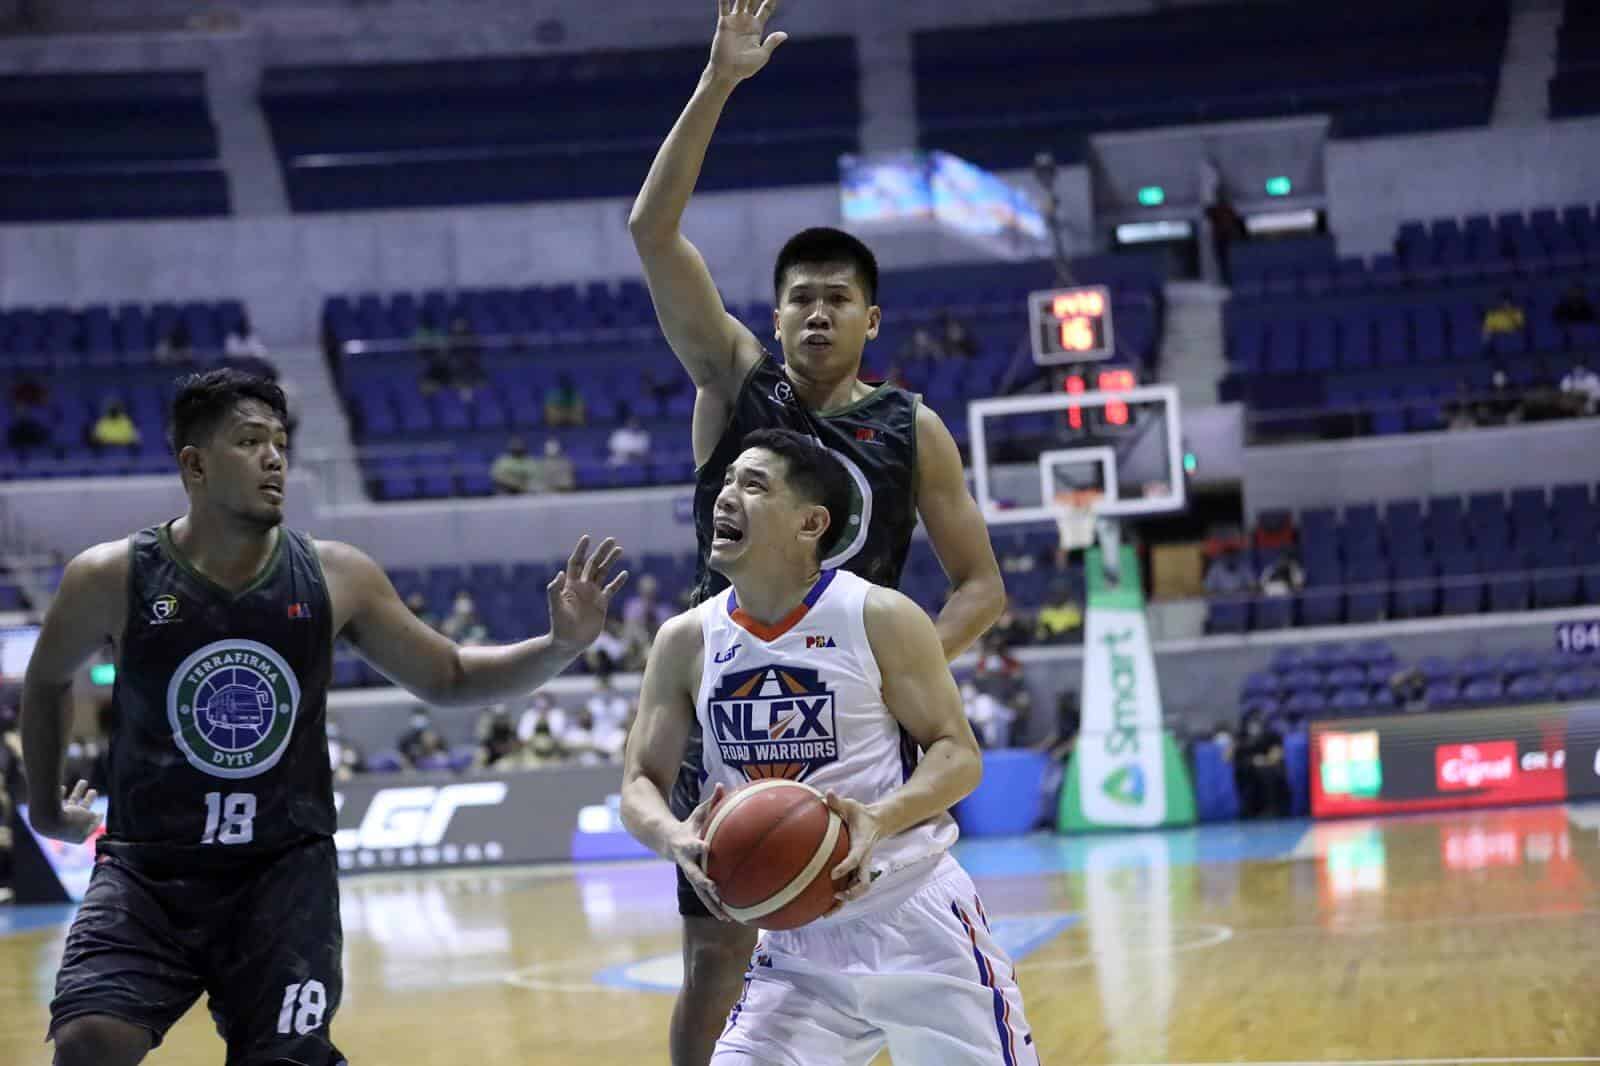 NLEX basketball players rally to stun Terrafirma with a comeback from 16-point deficit.